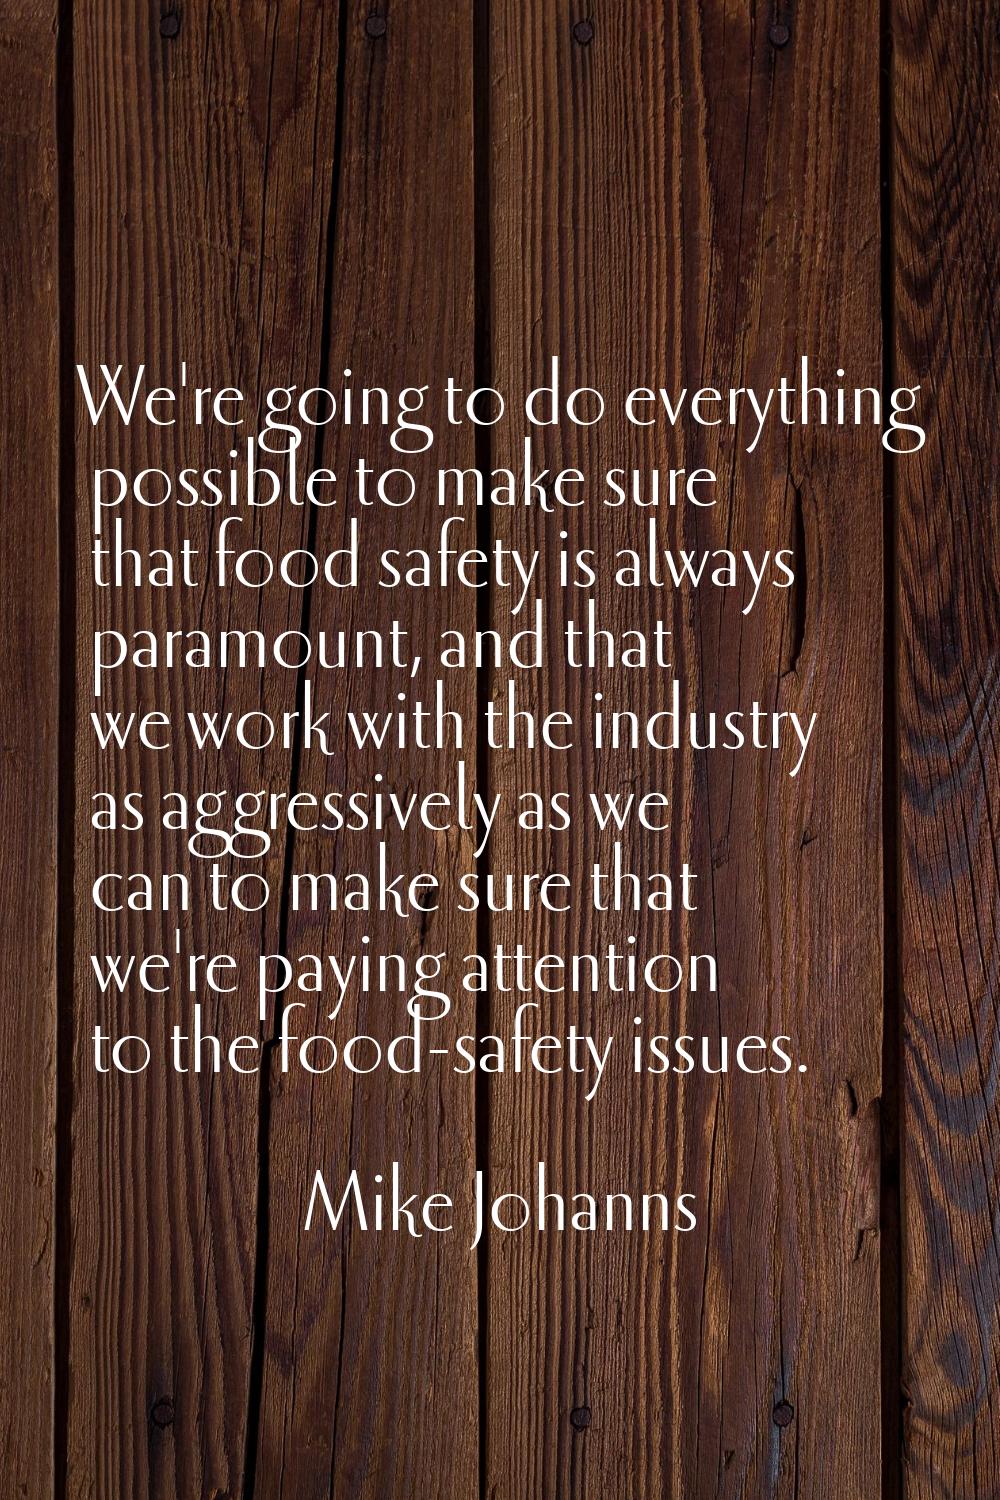 We're going to do everything possible to make sure that food safety is always paramount, and that w